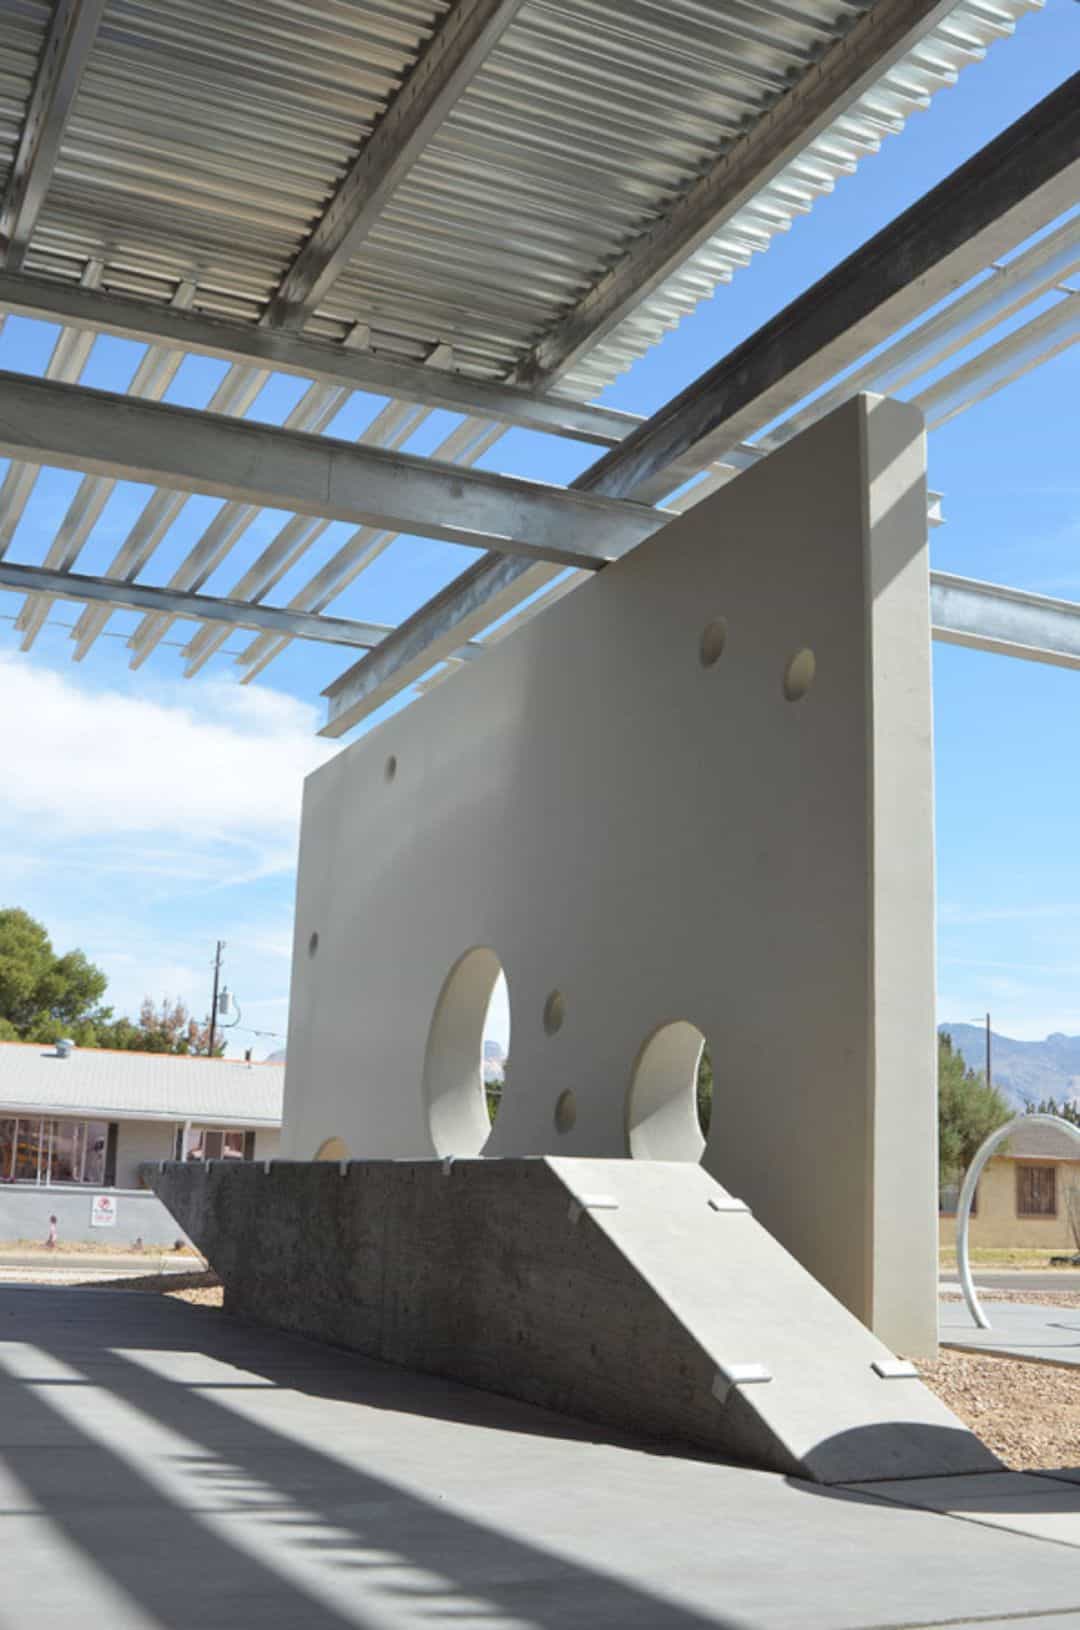 Ssa Tucson The Tilt Up Concrete Facility In Tucsons Welcoming Environment 17